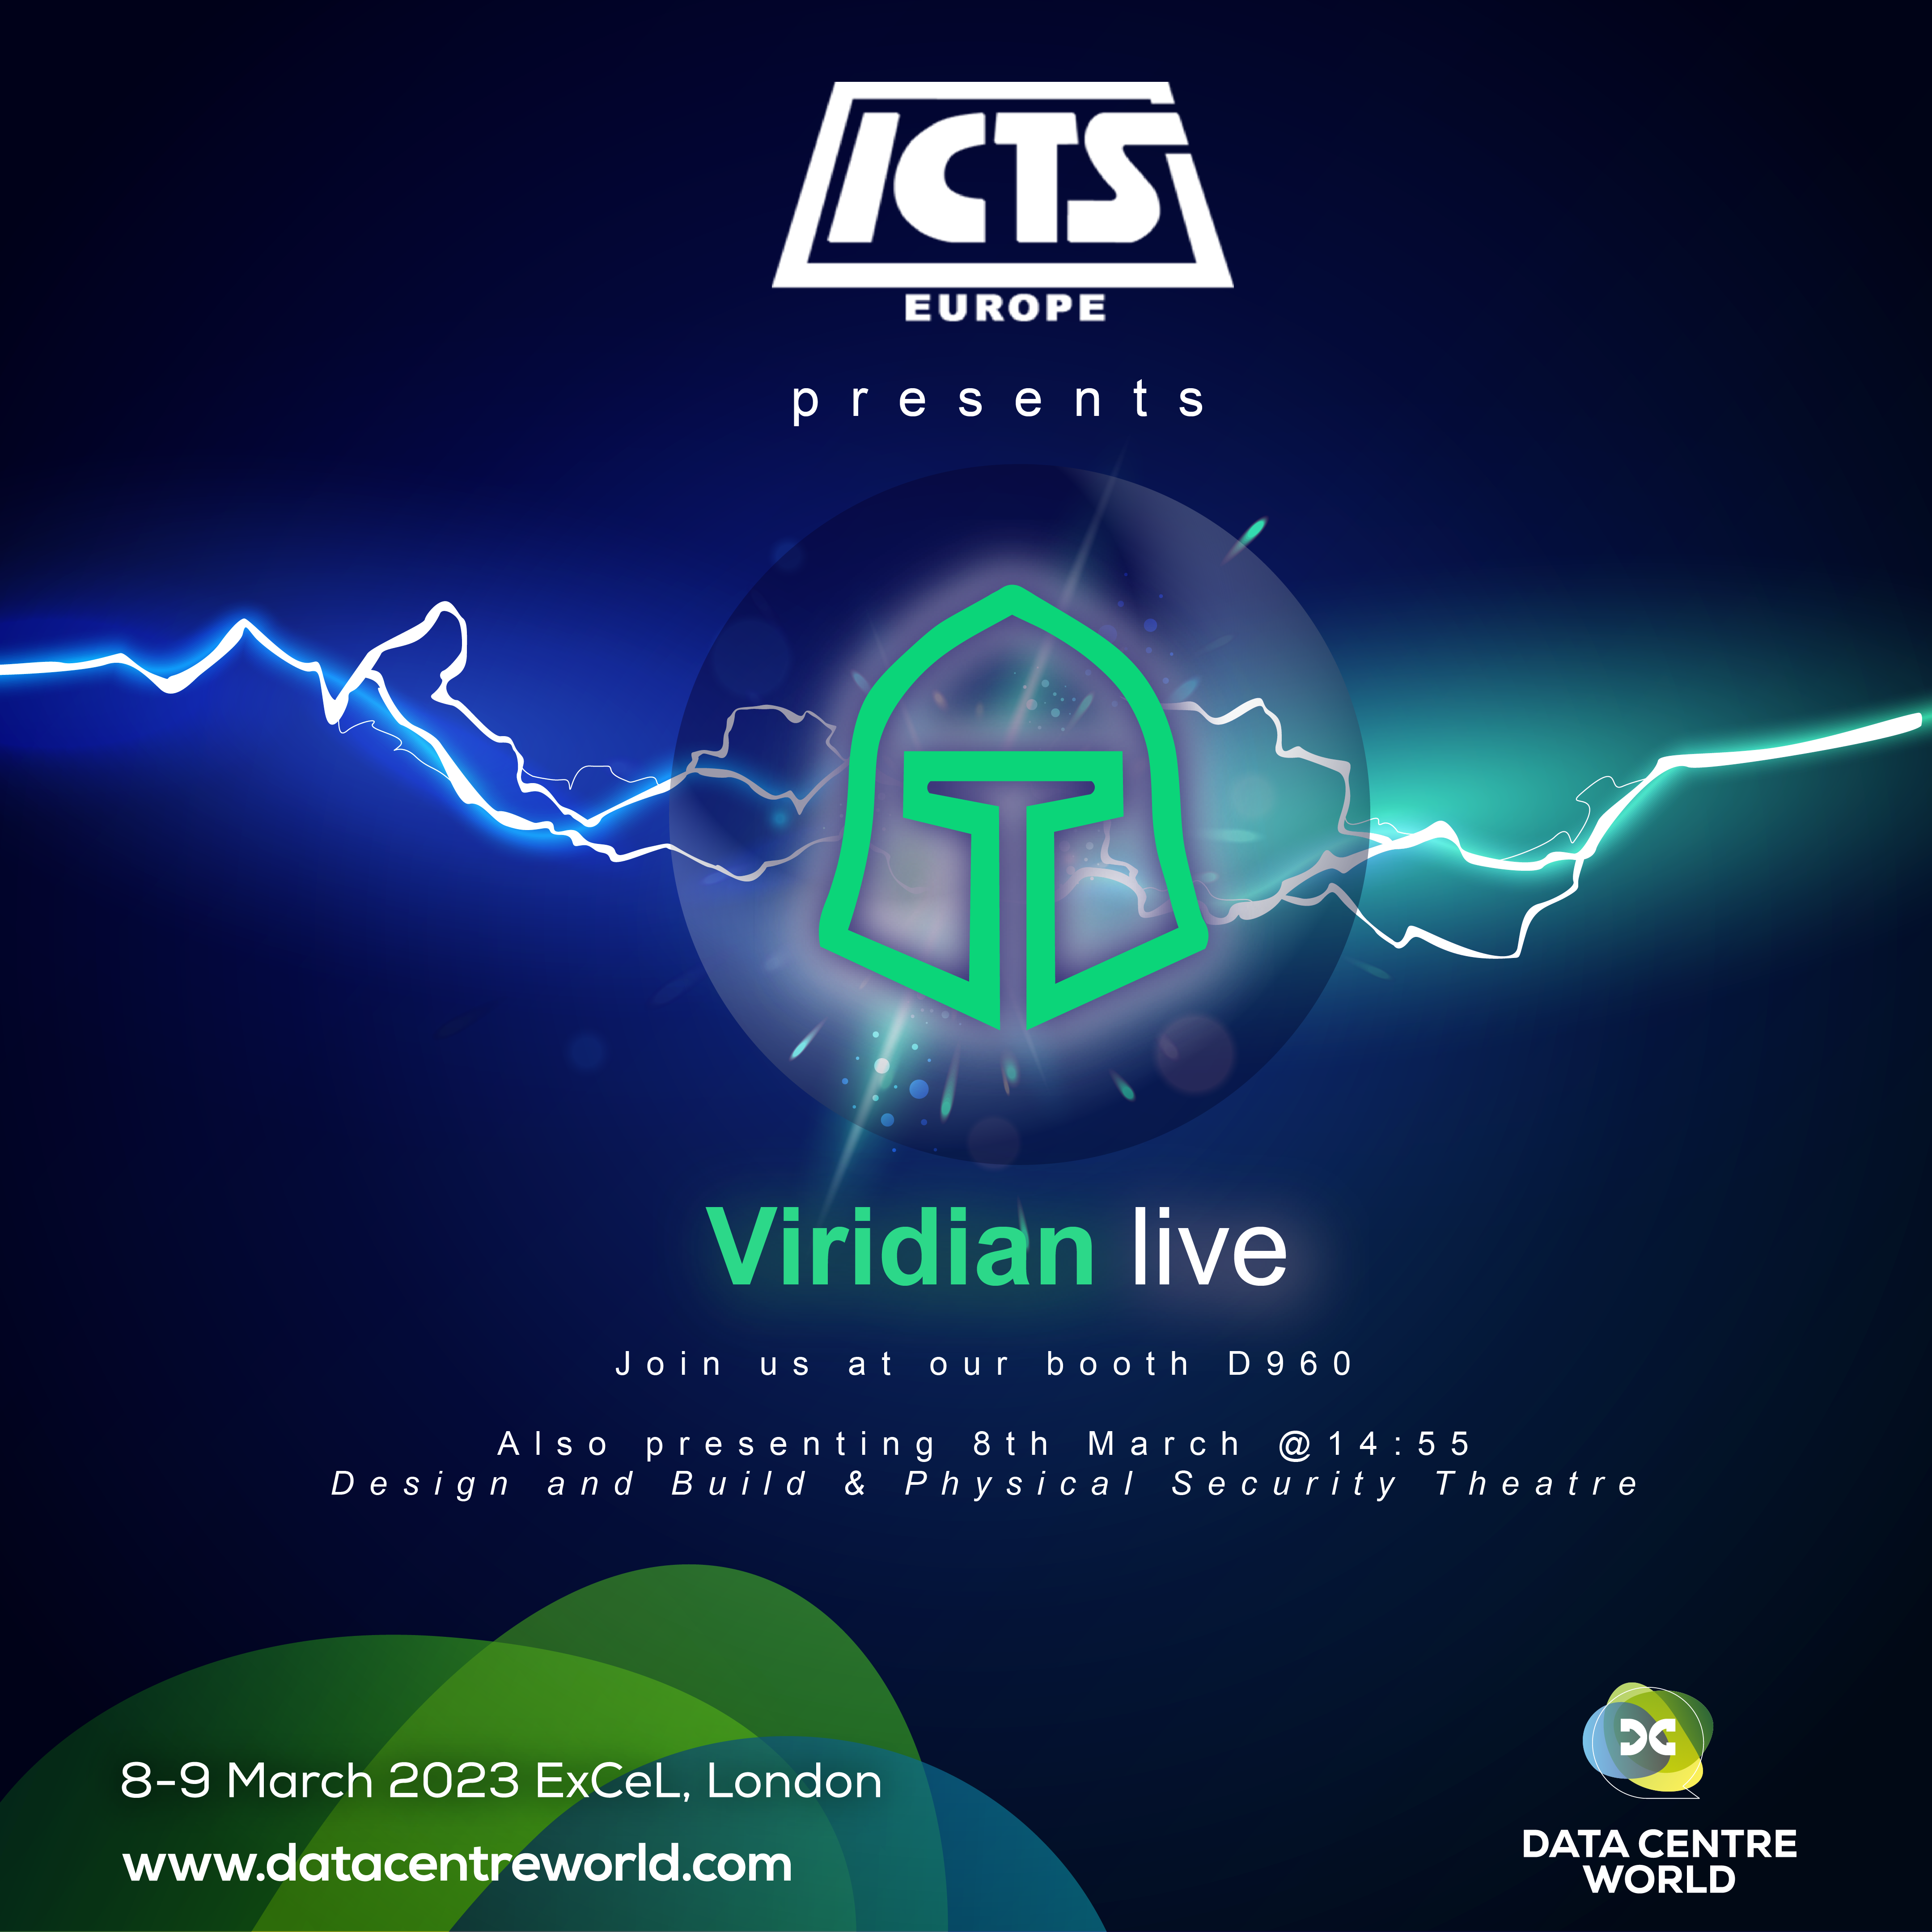 ICTS is proud to be participating in Data Centre World 2023. Join us at our booth D960 to see Viridian live!